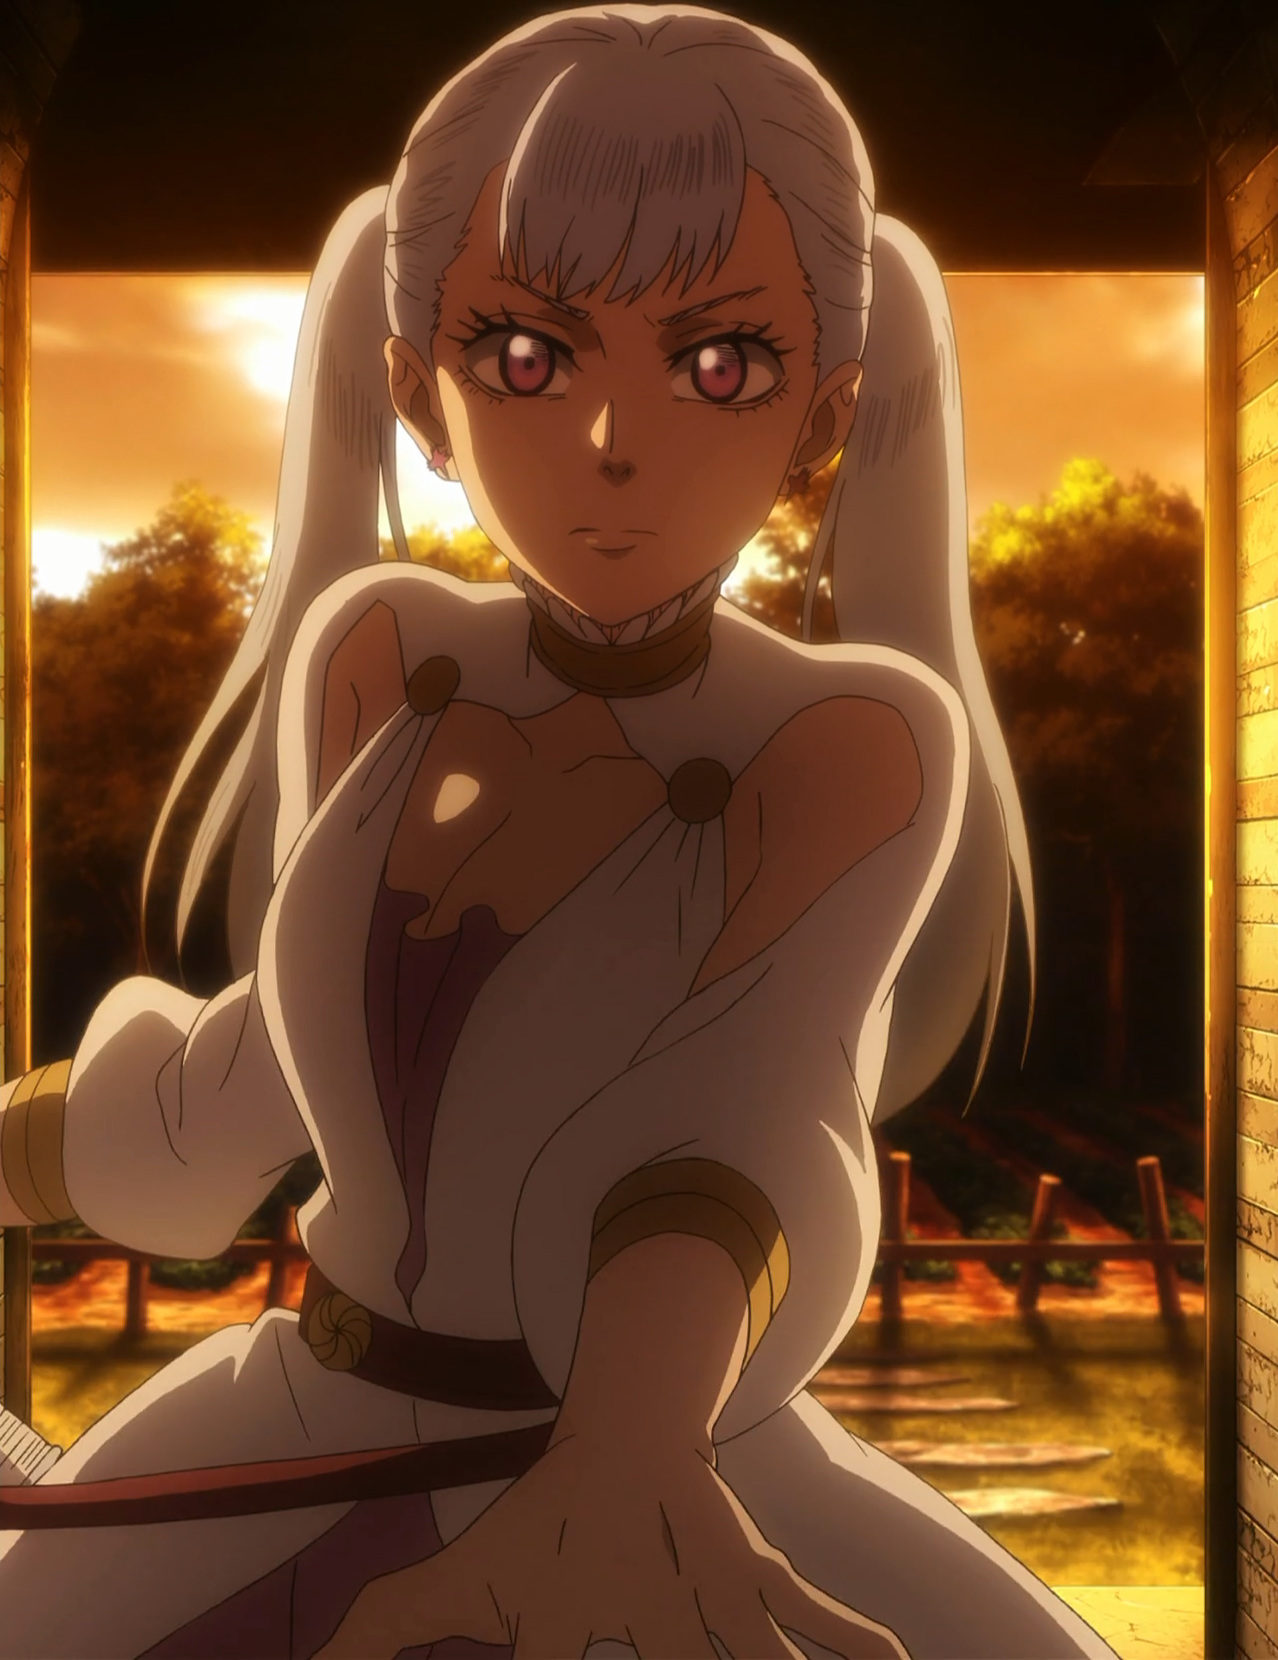 She’s one of my favorites from, Black Clover. 